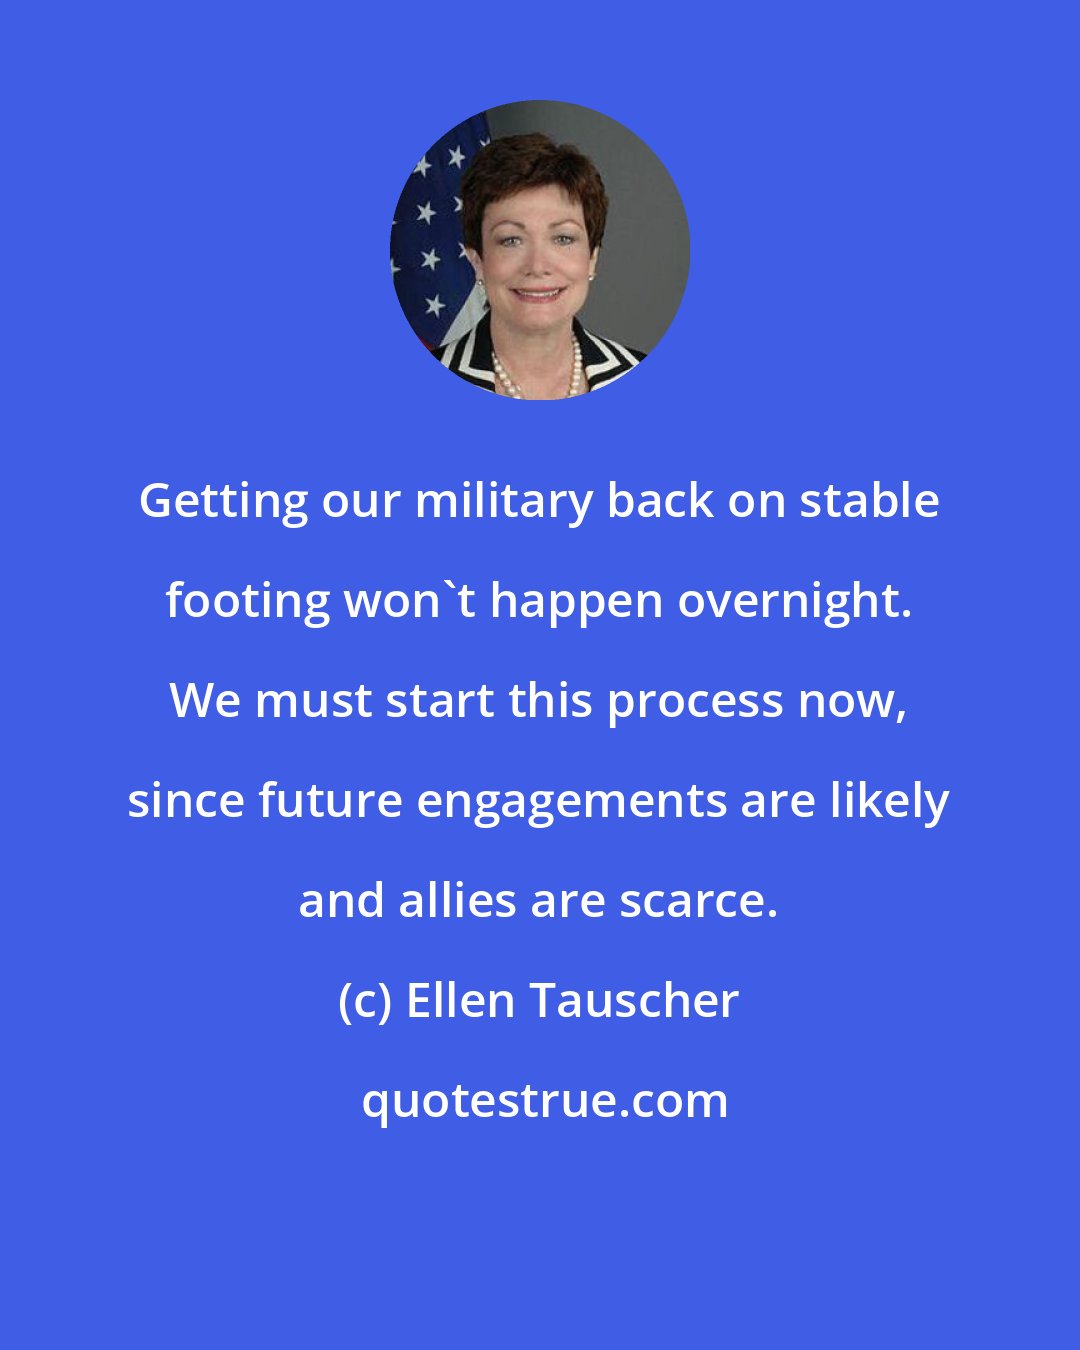 Ellen Tauscher: Getting our military back on stable footing won't happen overnight. We must start this process now, since future engagements are likely and allies are scarce.